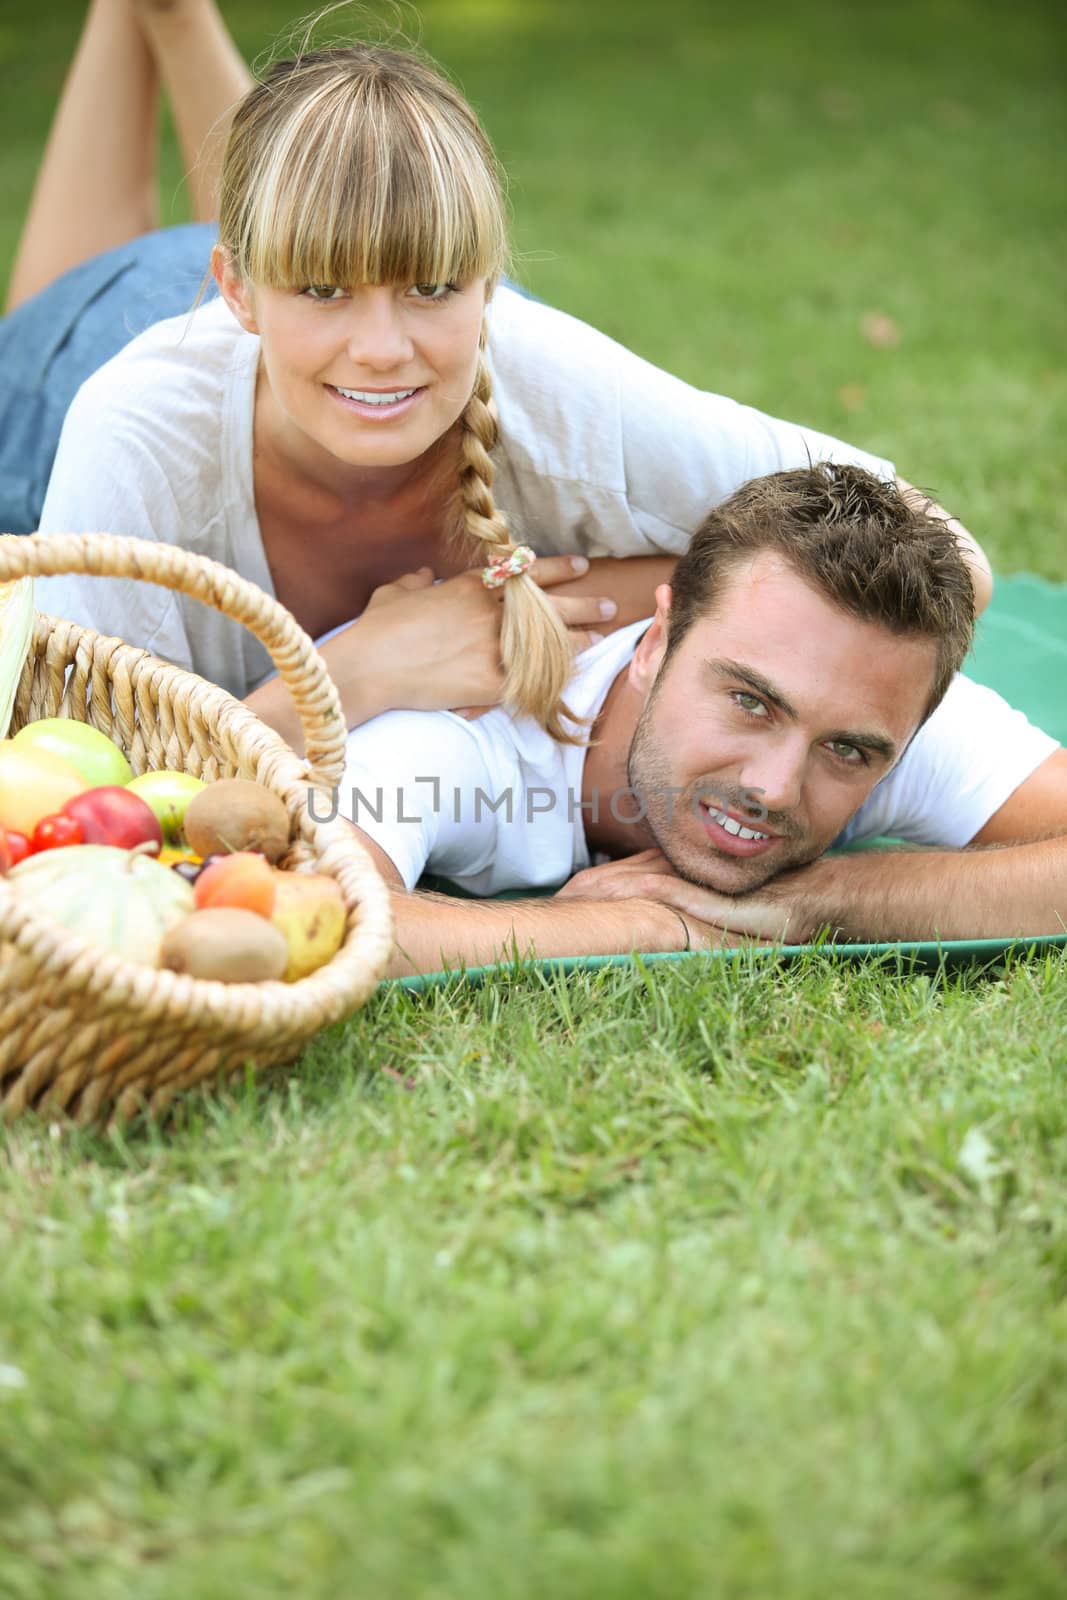 Couple having a romantic picnic together